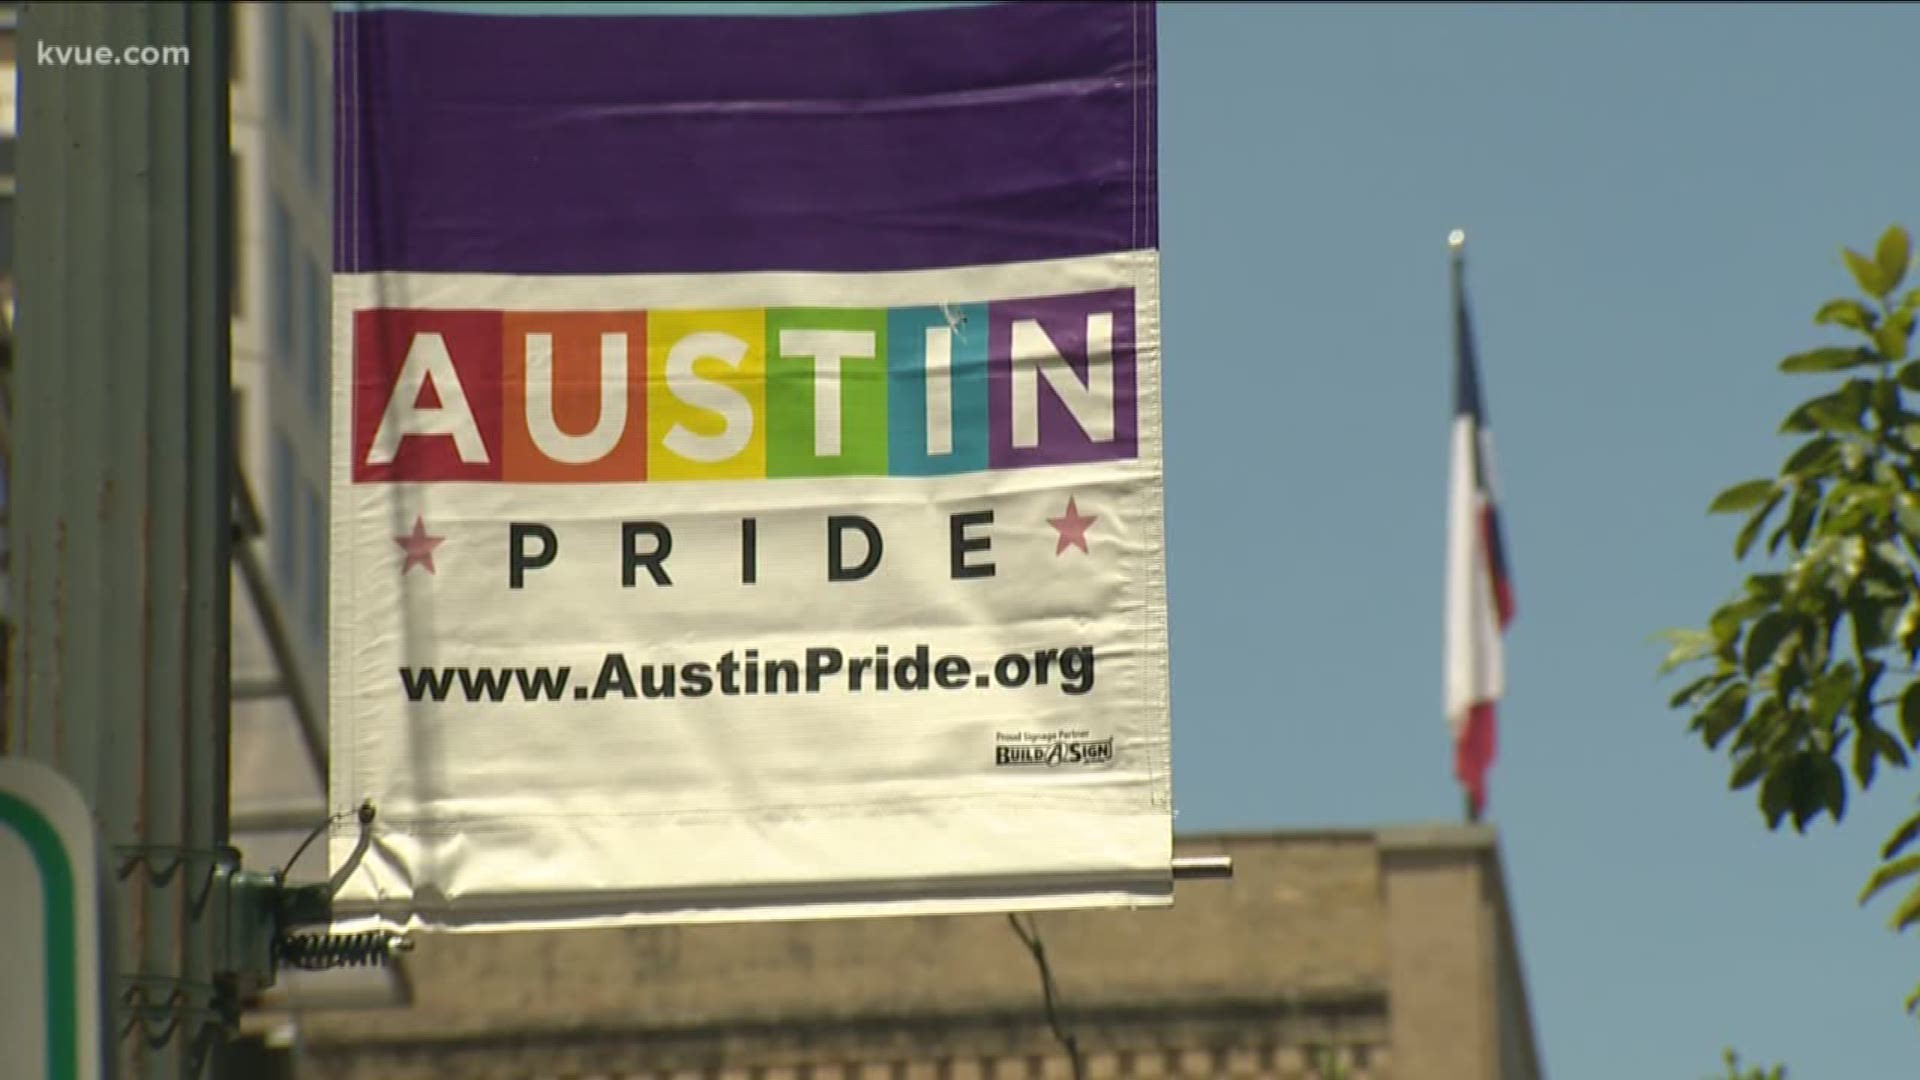 Hundreds of thousands of people are expected to attend Austin Pride, and police are making plans to keep everyone safe.